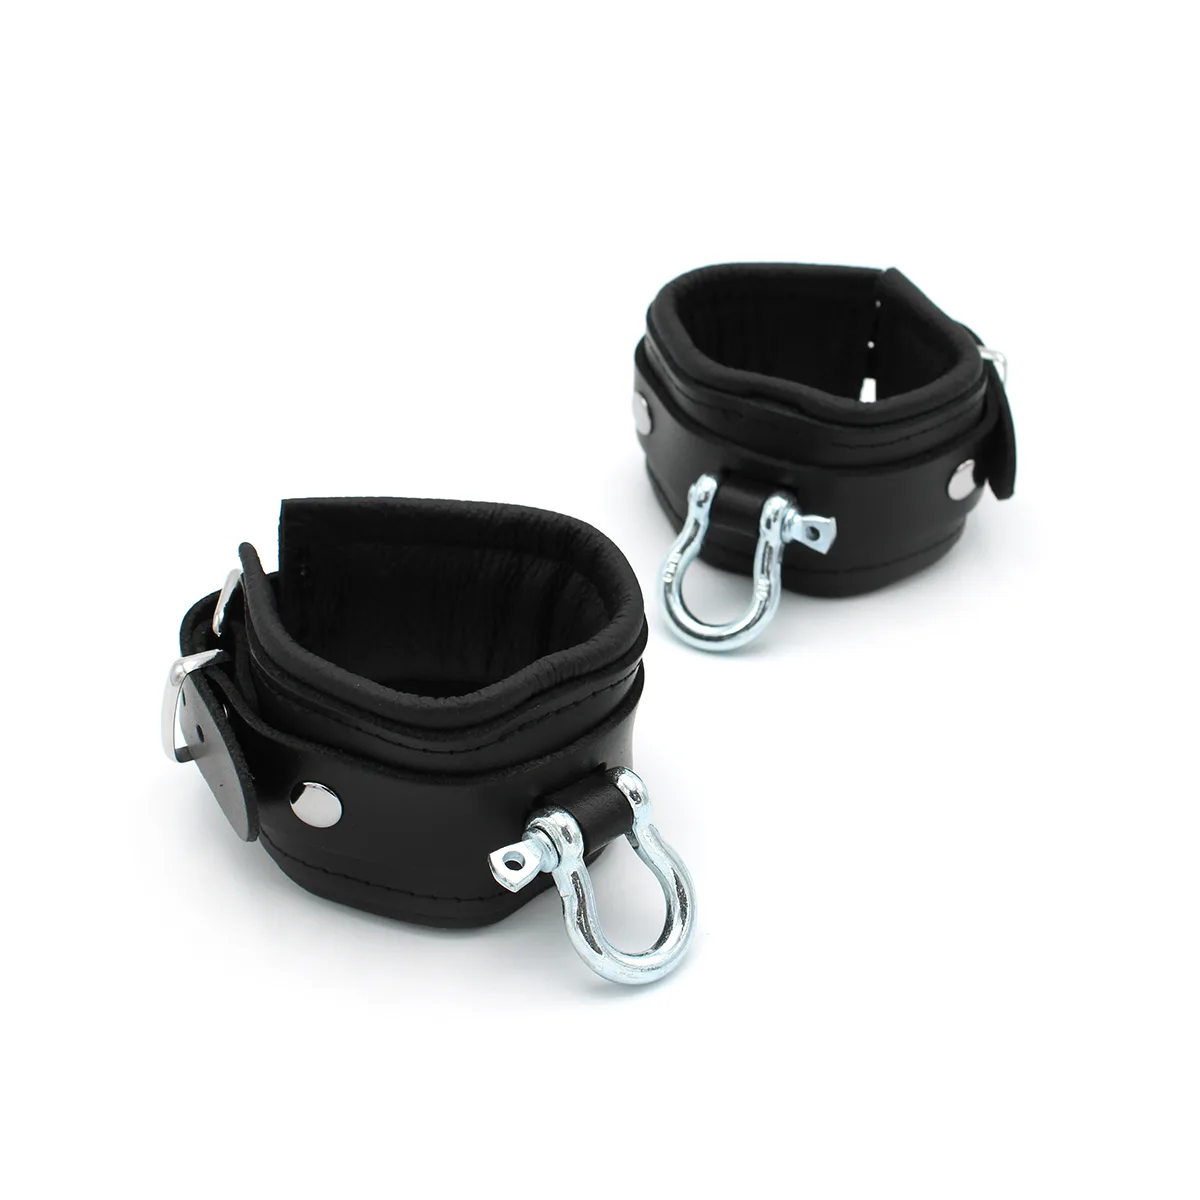 Leather-Handcuffs-with-Metal-Shackle-134-KIO-0371-2